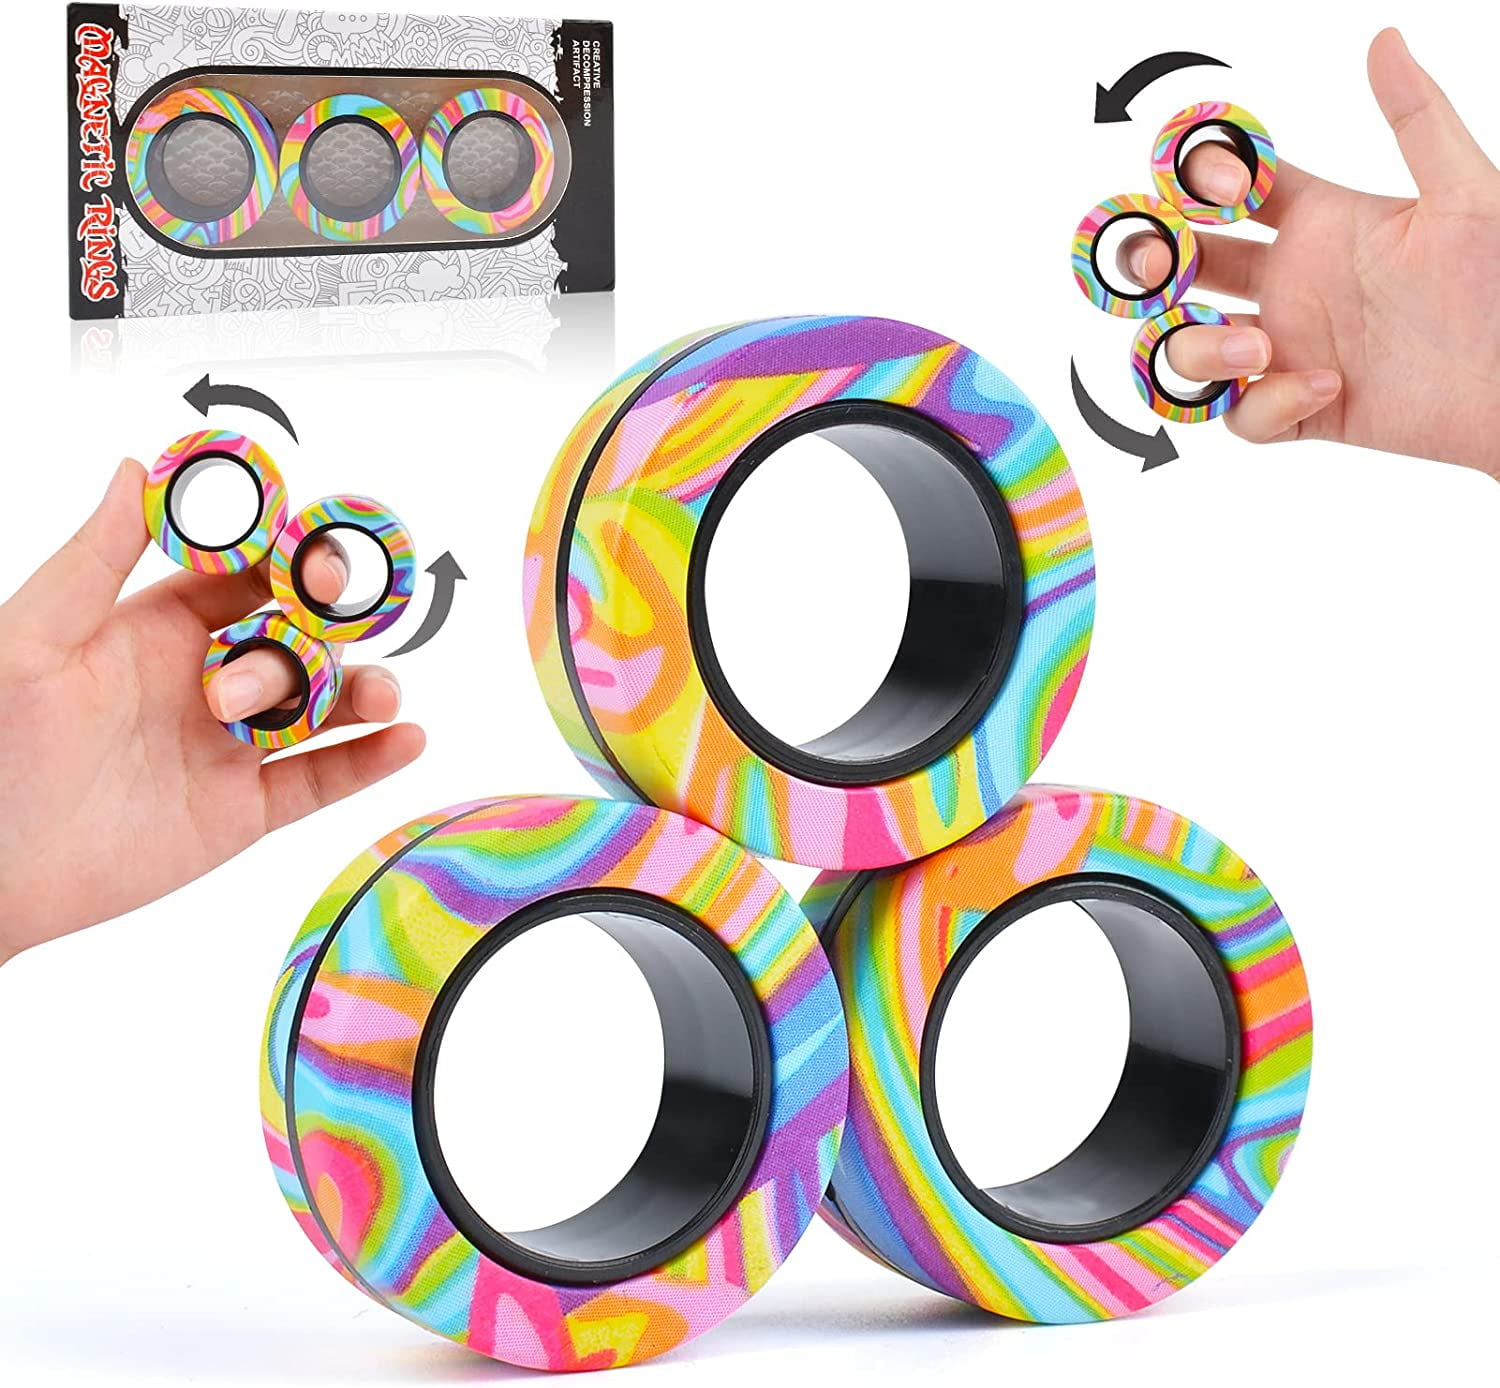 Amazon.com: MBOUTrising 12Pcs Magnetic Ring Fidget Toys Set, Graffiti Camo  Fingers Magnet Rings, ADHD Stress Relief Magical Spinner Toys for Training  Relieves Autism Anxiety, Great Gift for Adults Teens Kids : Toys